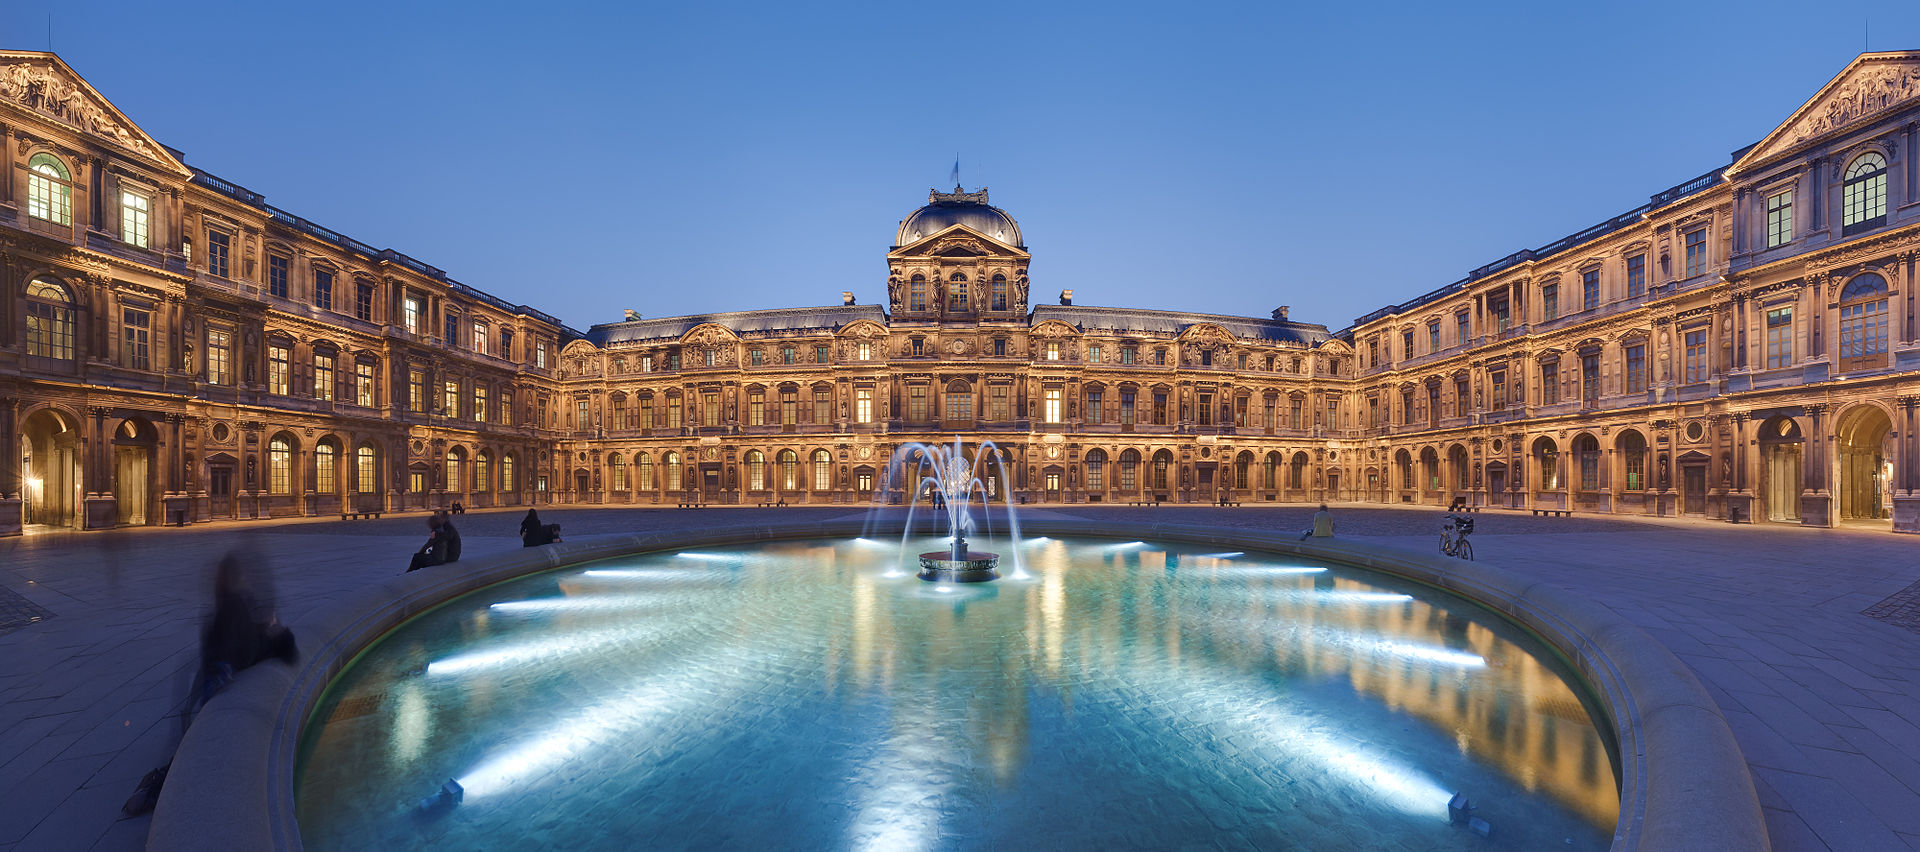 Louvre_Cour_Carree